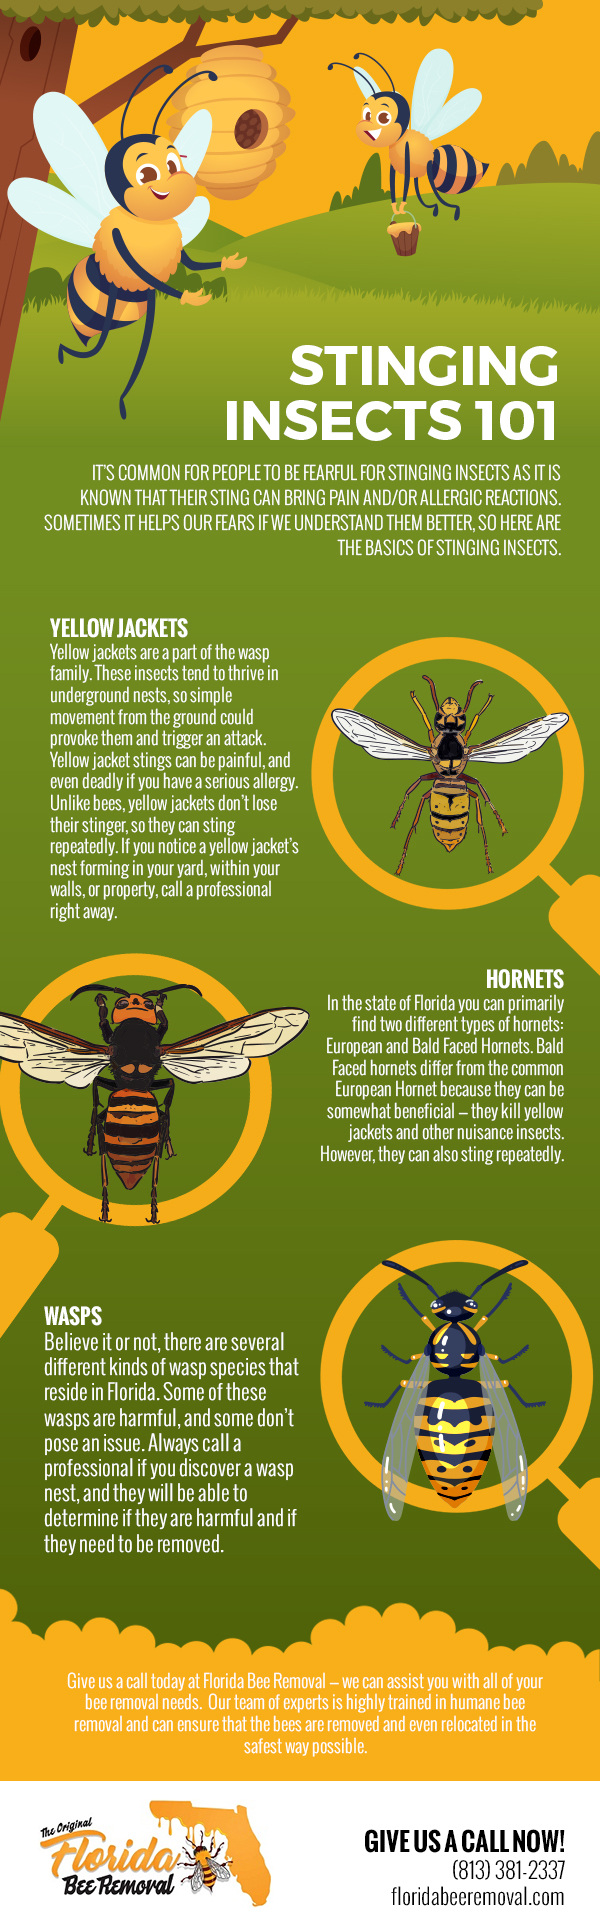 Stinging Insects 101 [infographic]